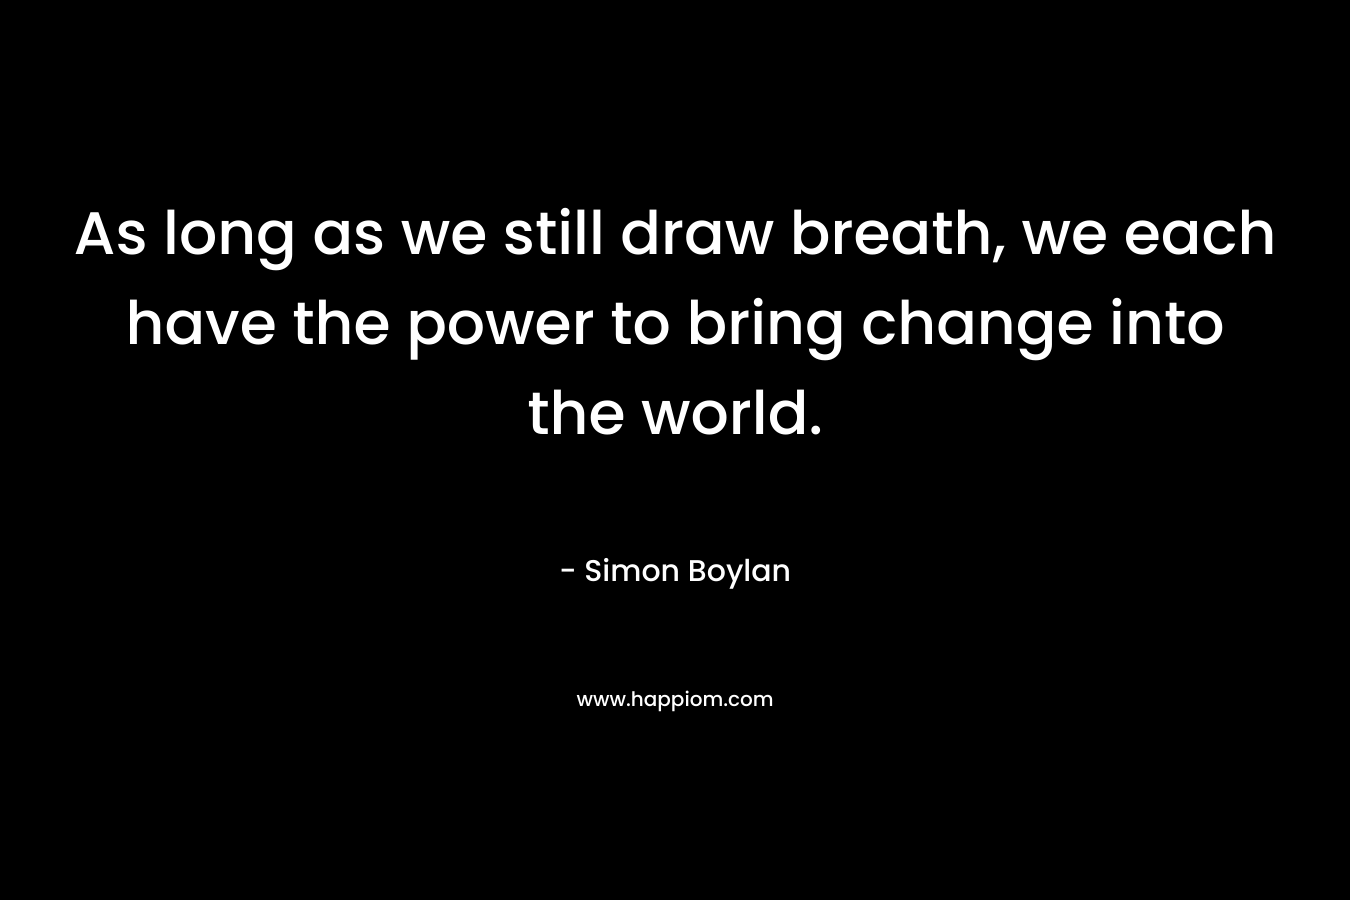 As long as we still draw breath, we each have the power to bring change into the world.